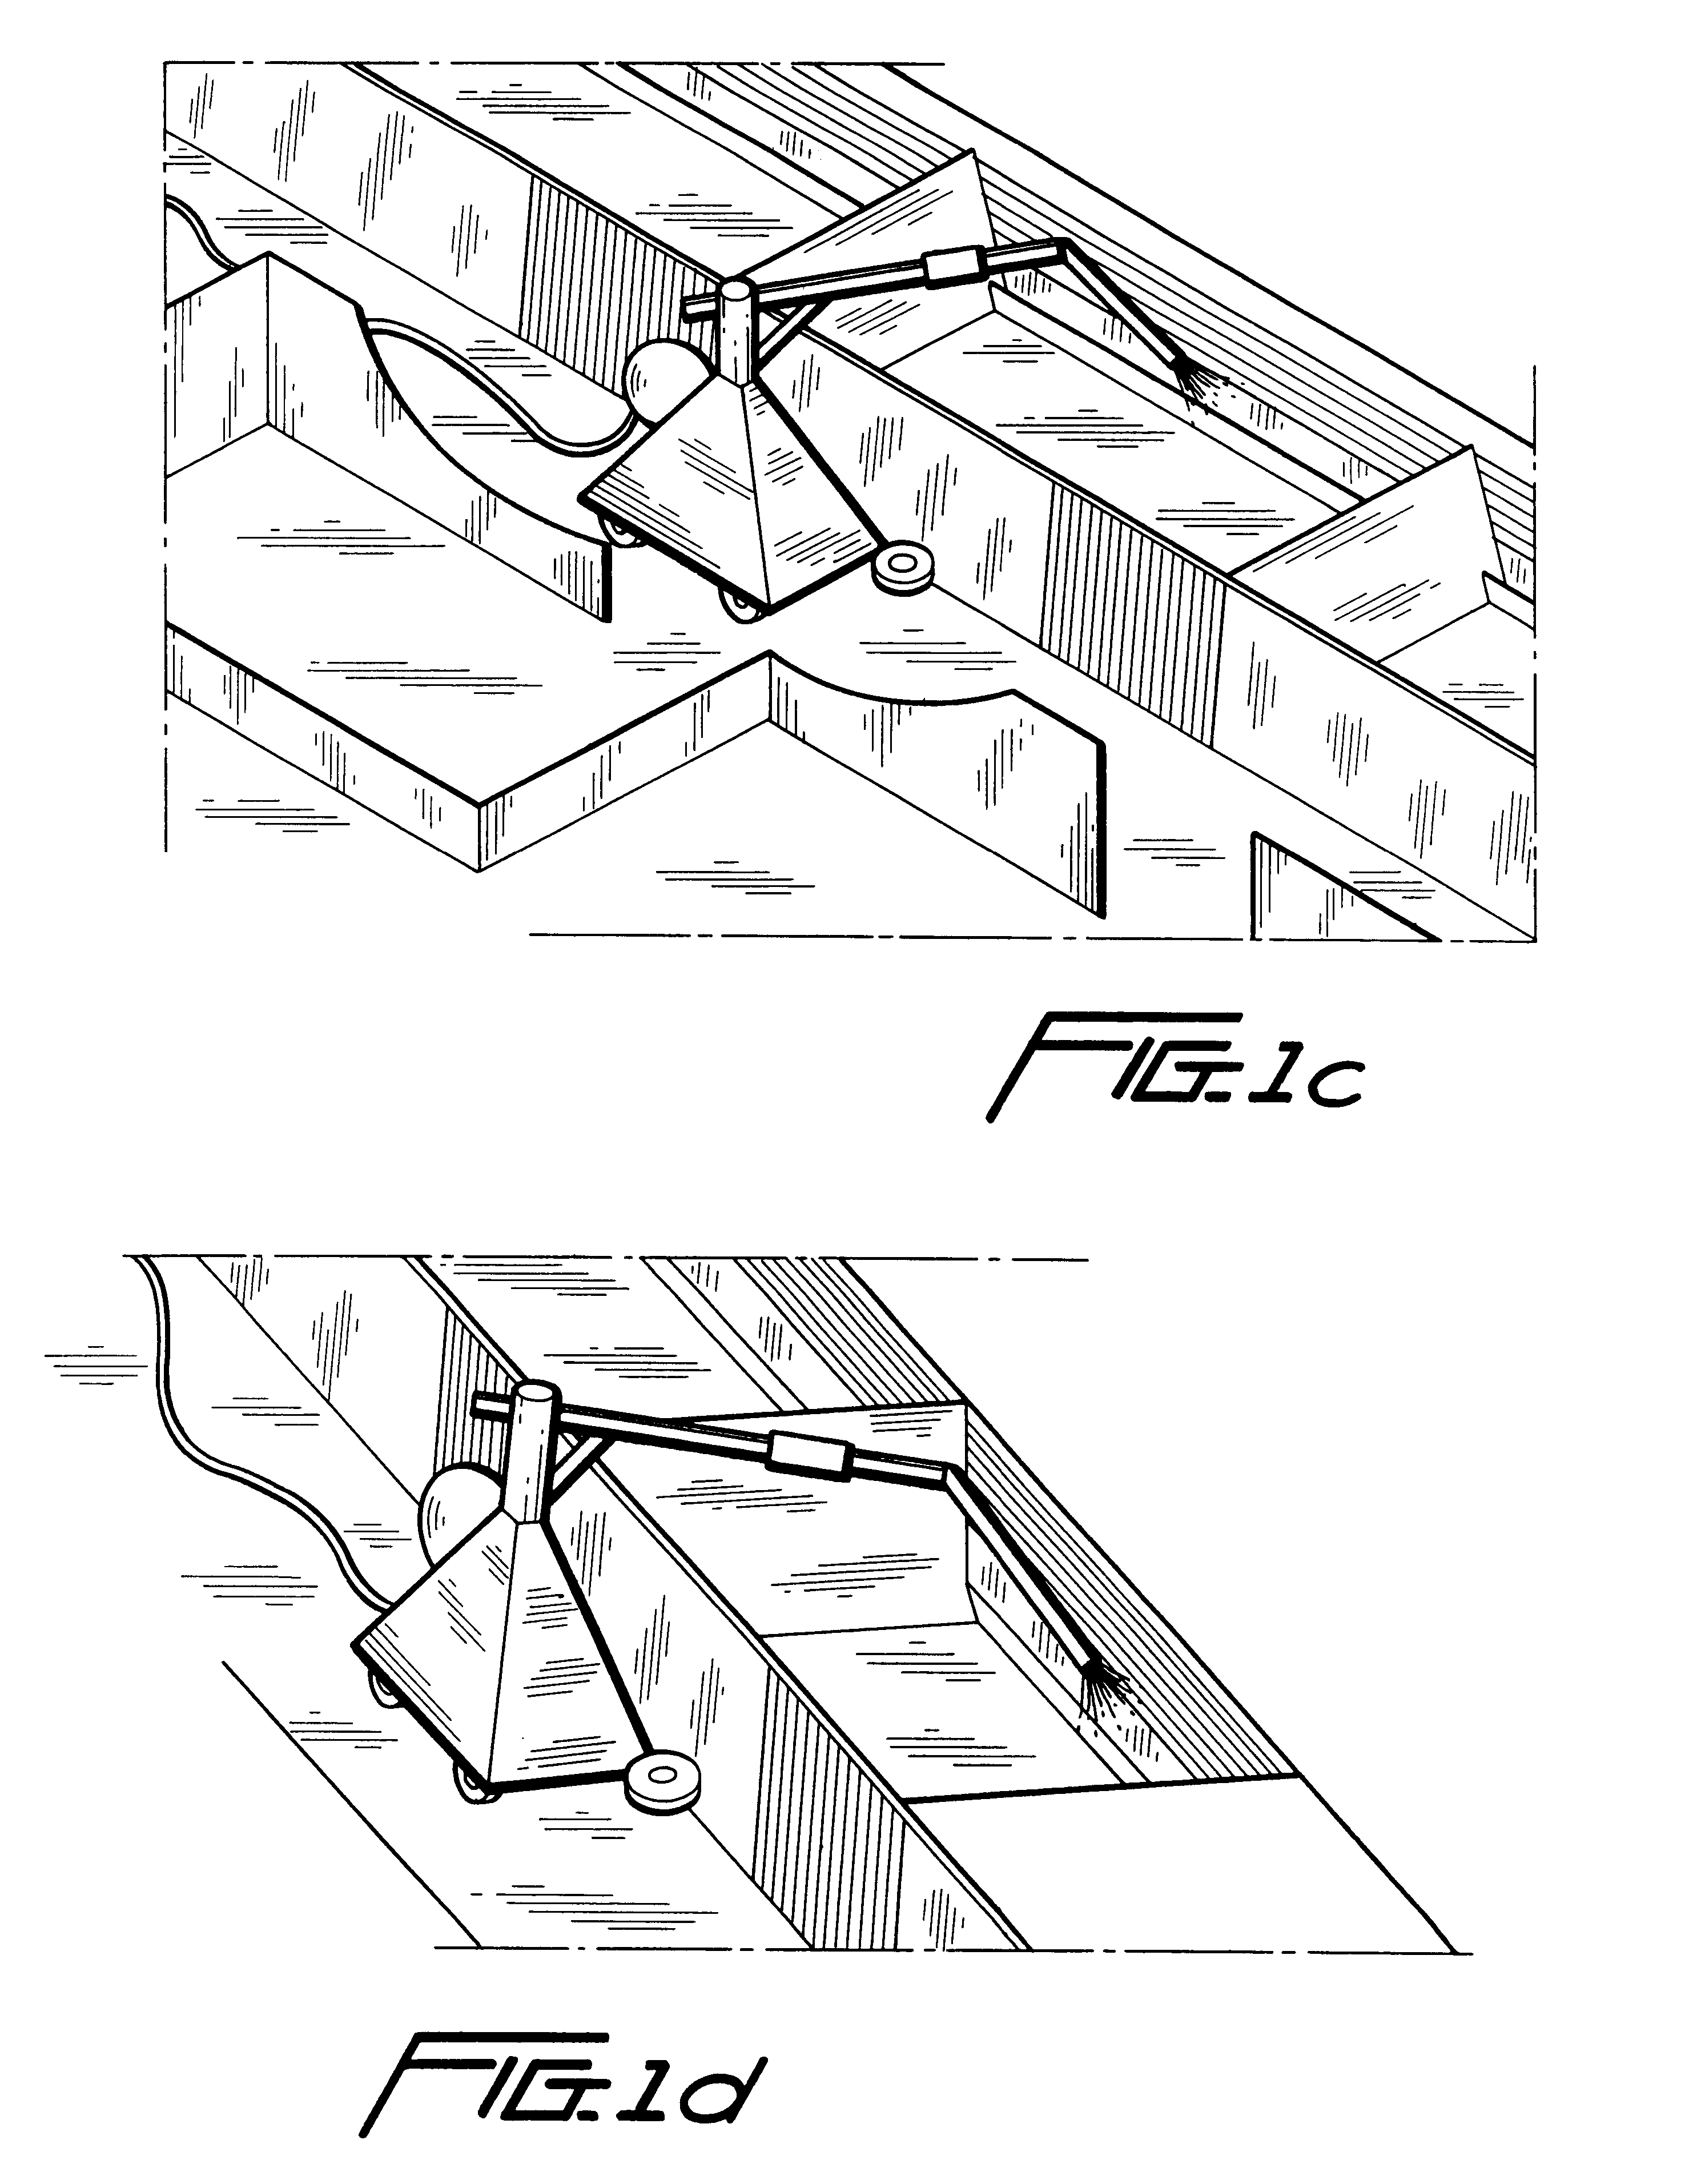 Method and device for the cleaning of animal stalls